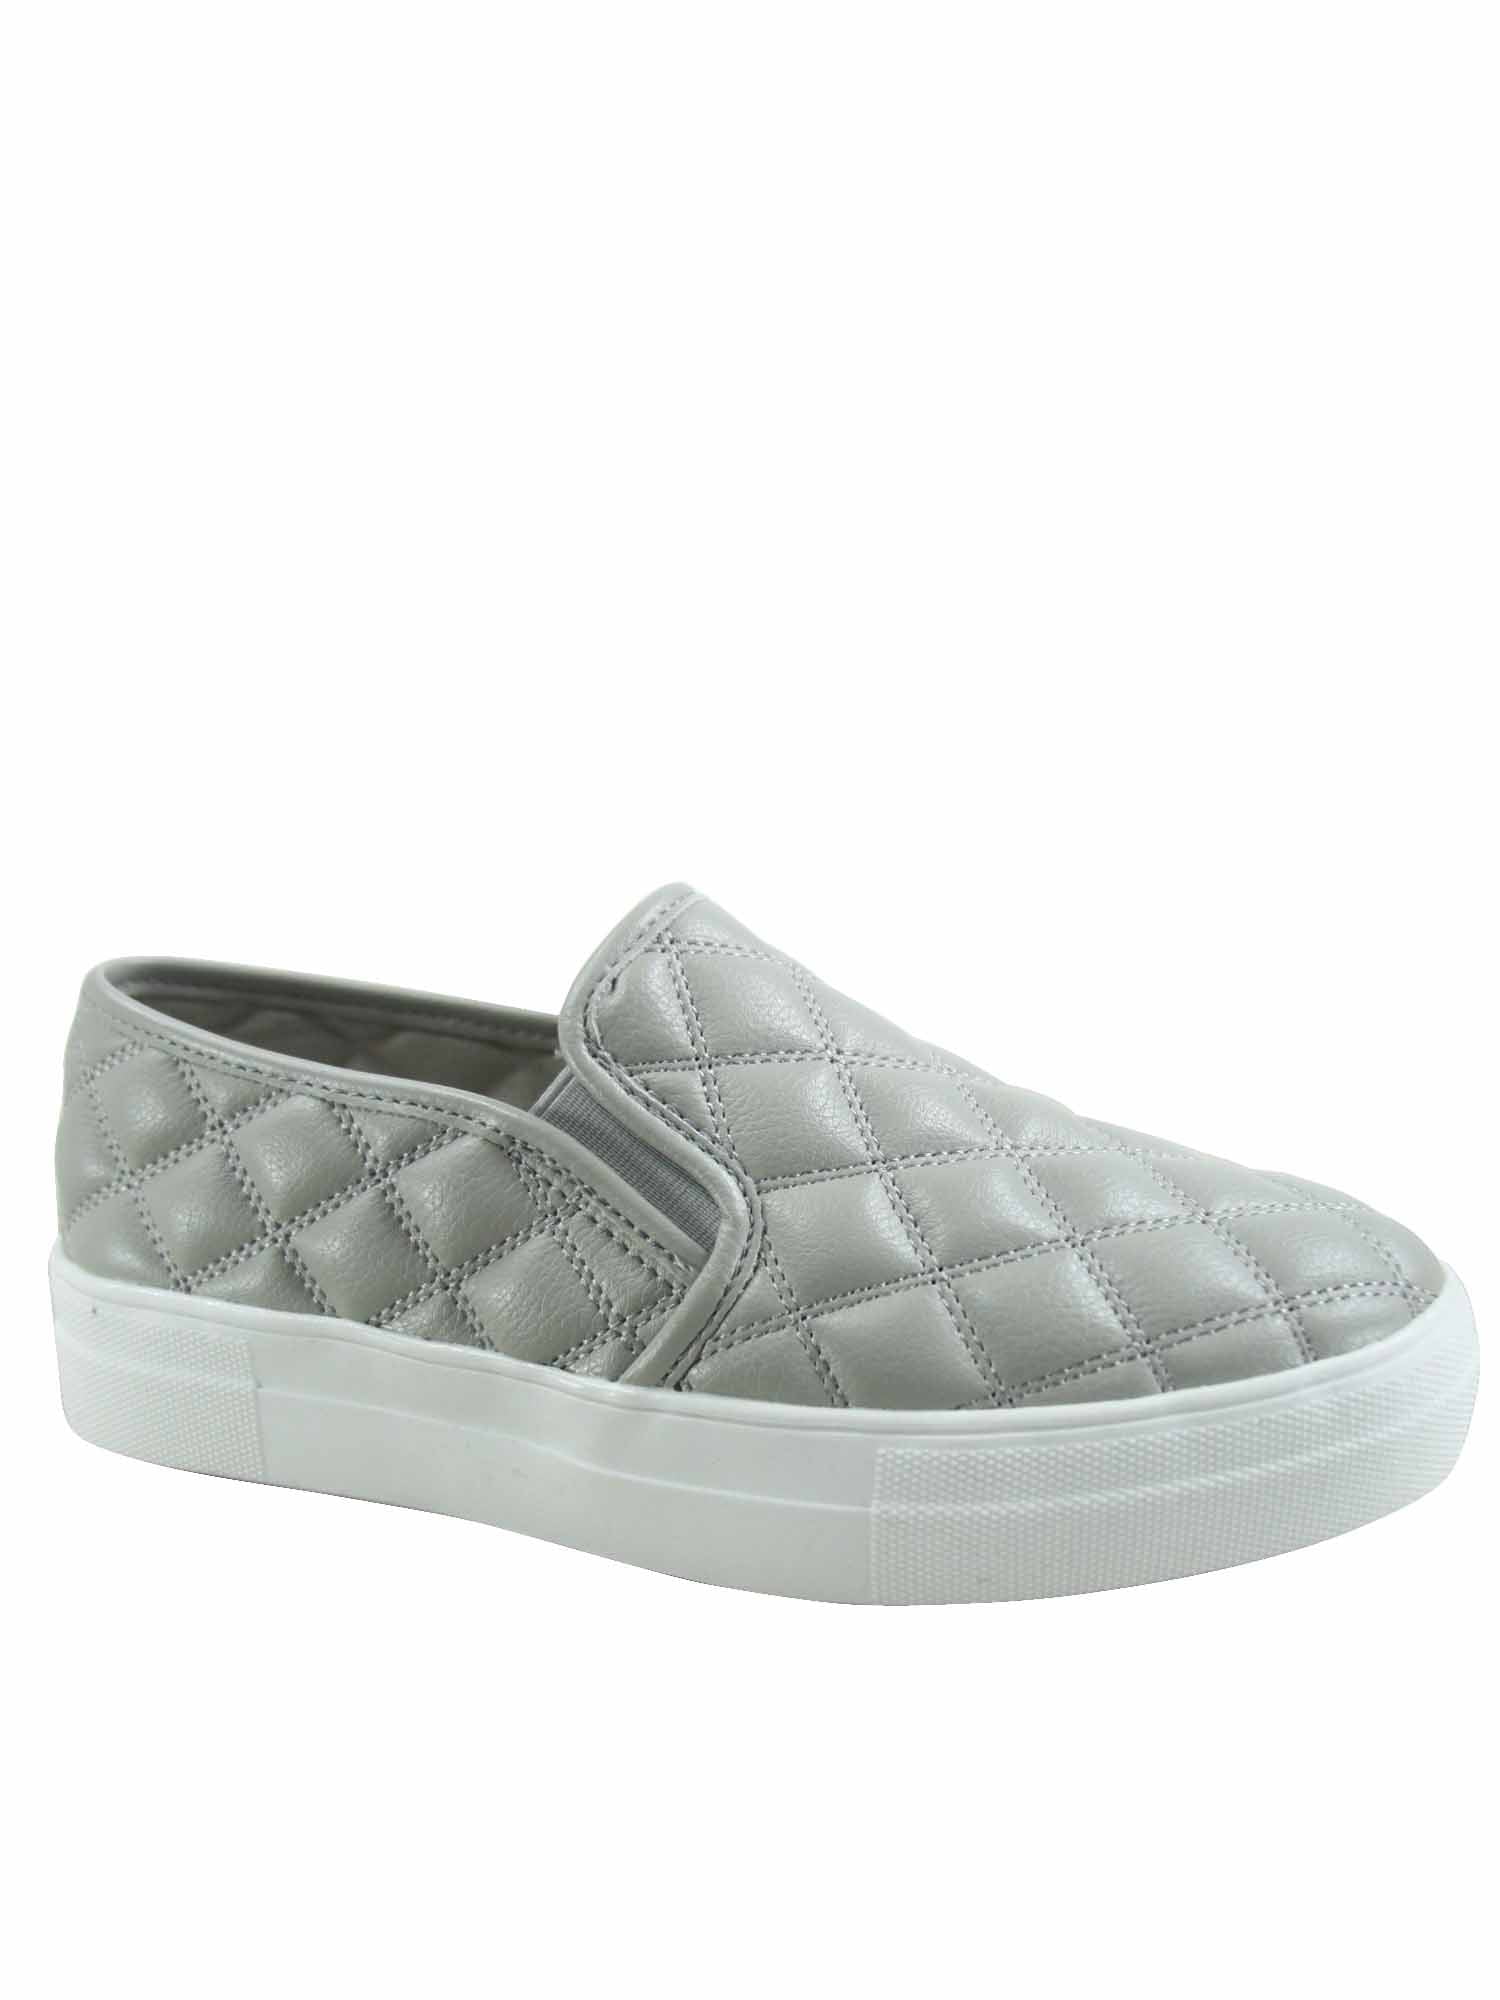 Soda Women's Causal Round Toe Slip On Flat Sneaker Shoes Size 5.5-11 NEW 